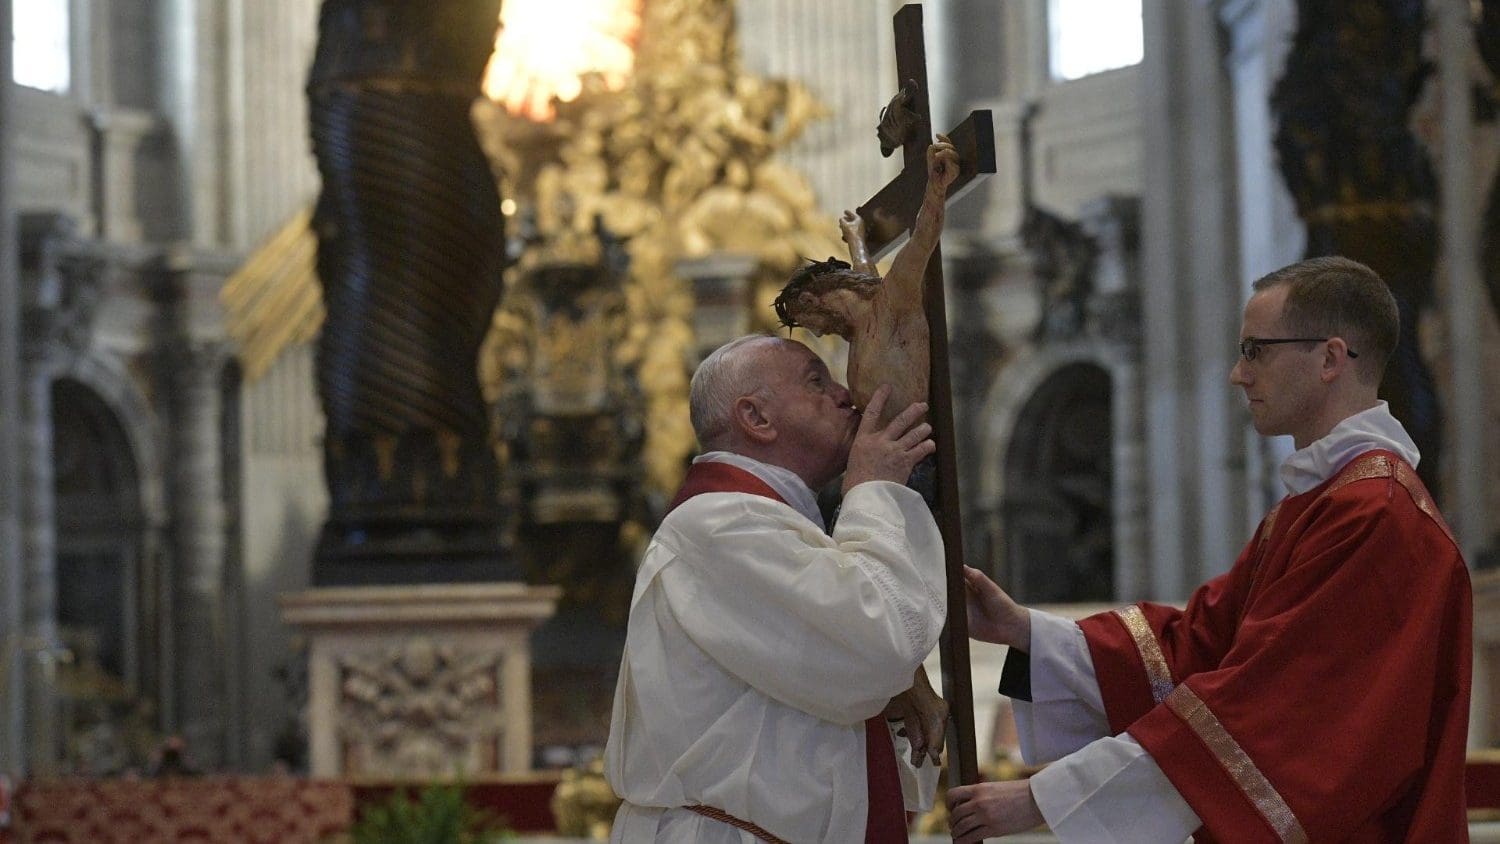 Vatican invites Catholics to pray for peace in Good Friday liturgy